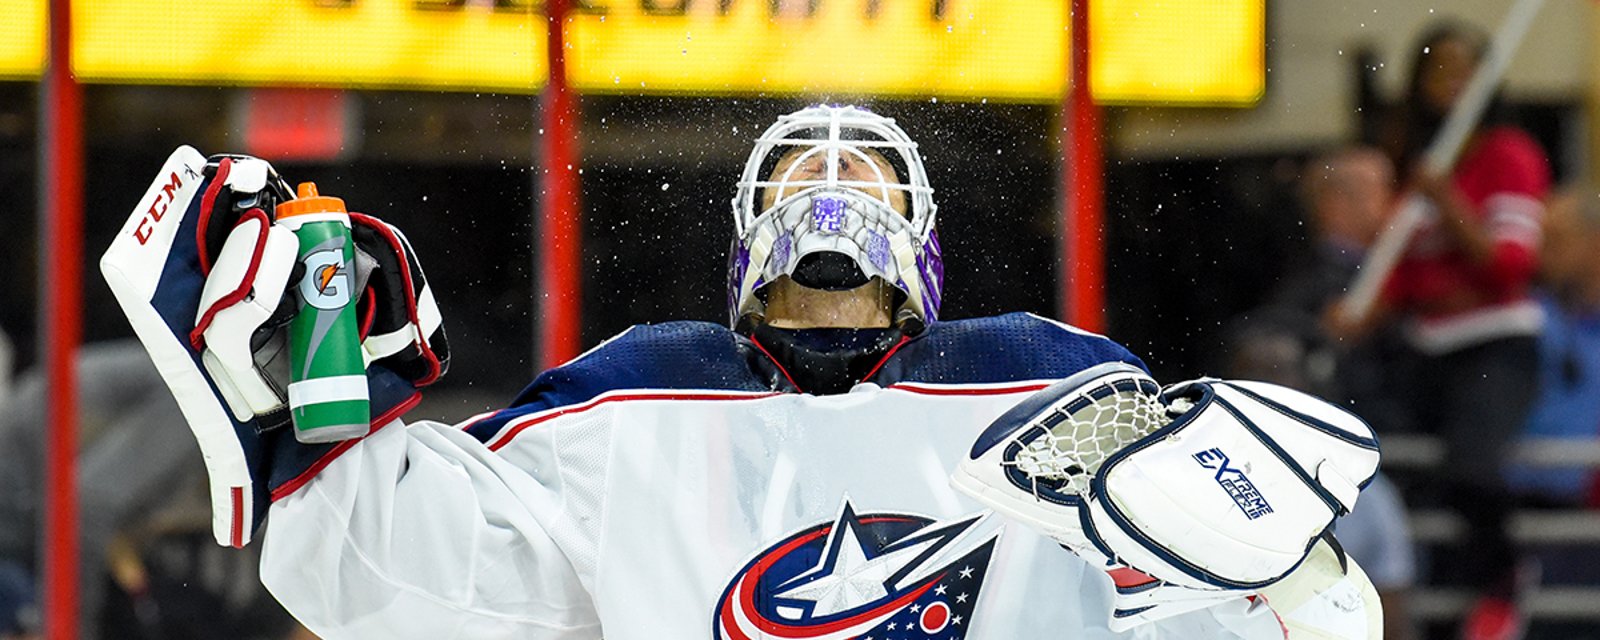 ICYMI: Bobrovsky has agreed to waive his no trade clause